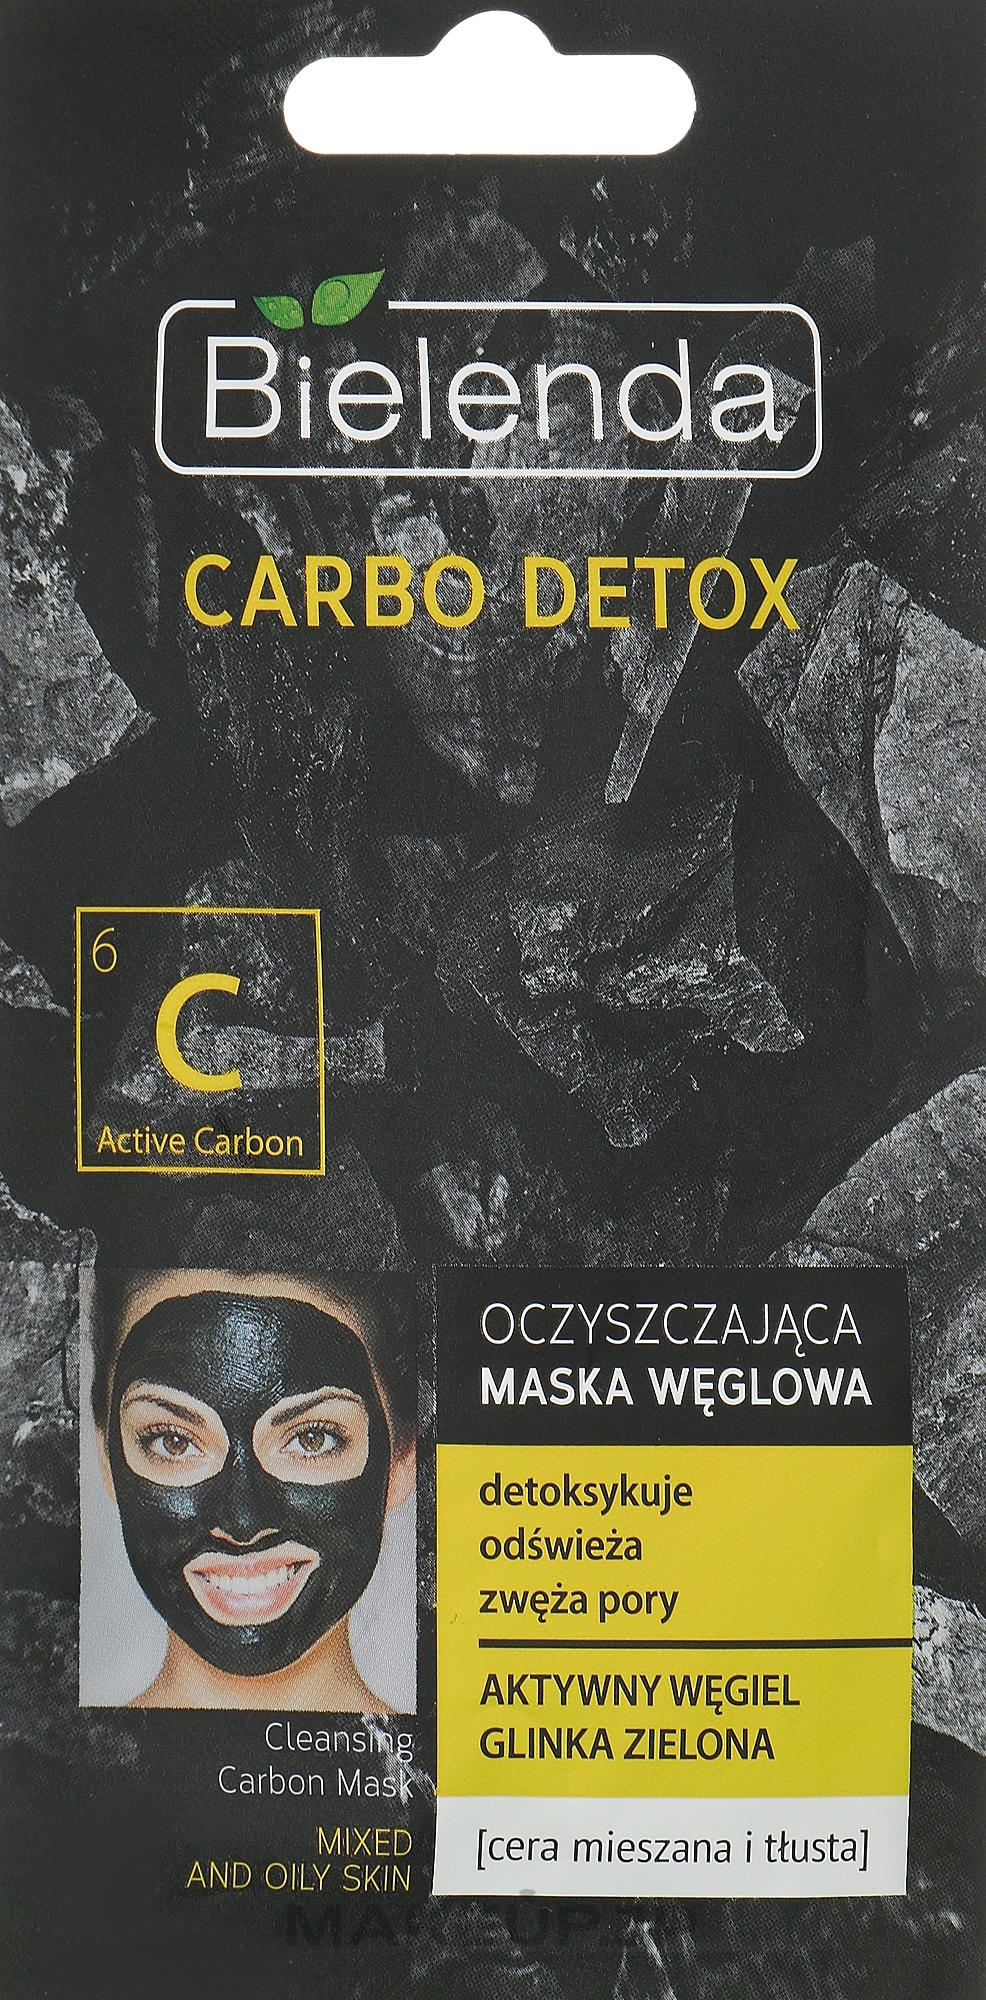 Charcoal Cleansing Mask for Combination Skin - Bielenda Carbo Detox Cleansing Mask Mixed and Oily Skin — photo 8 g